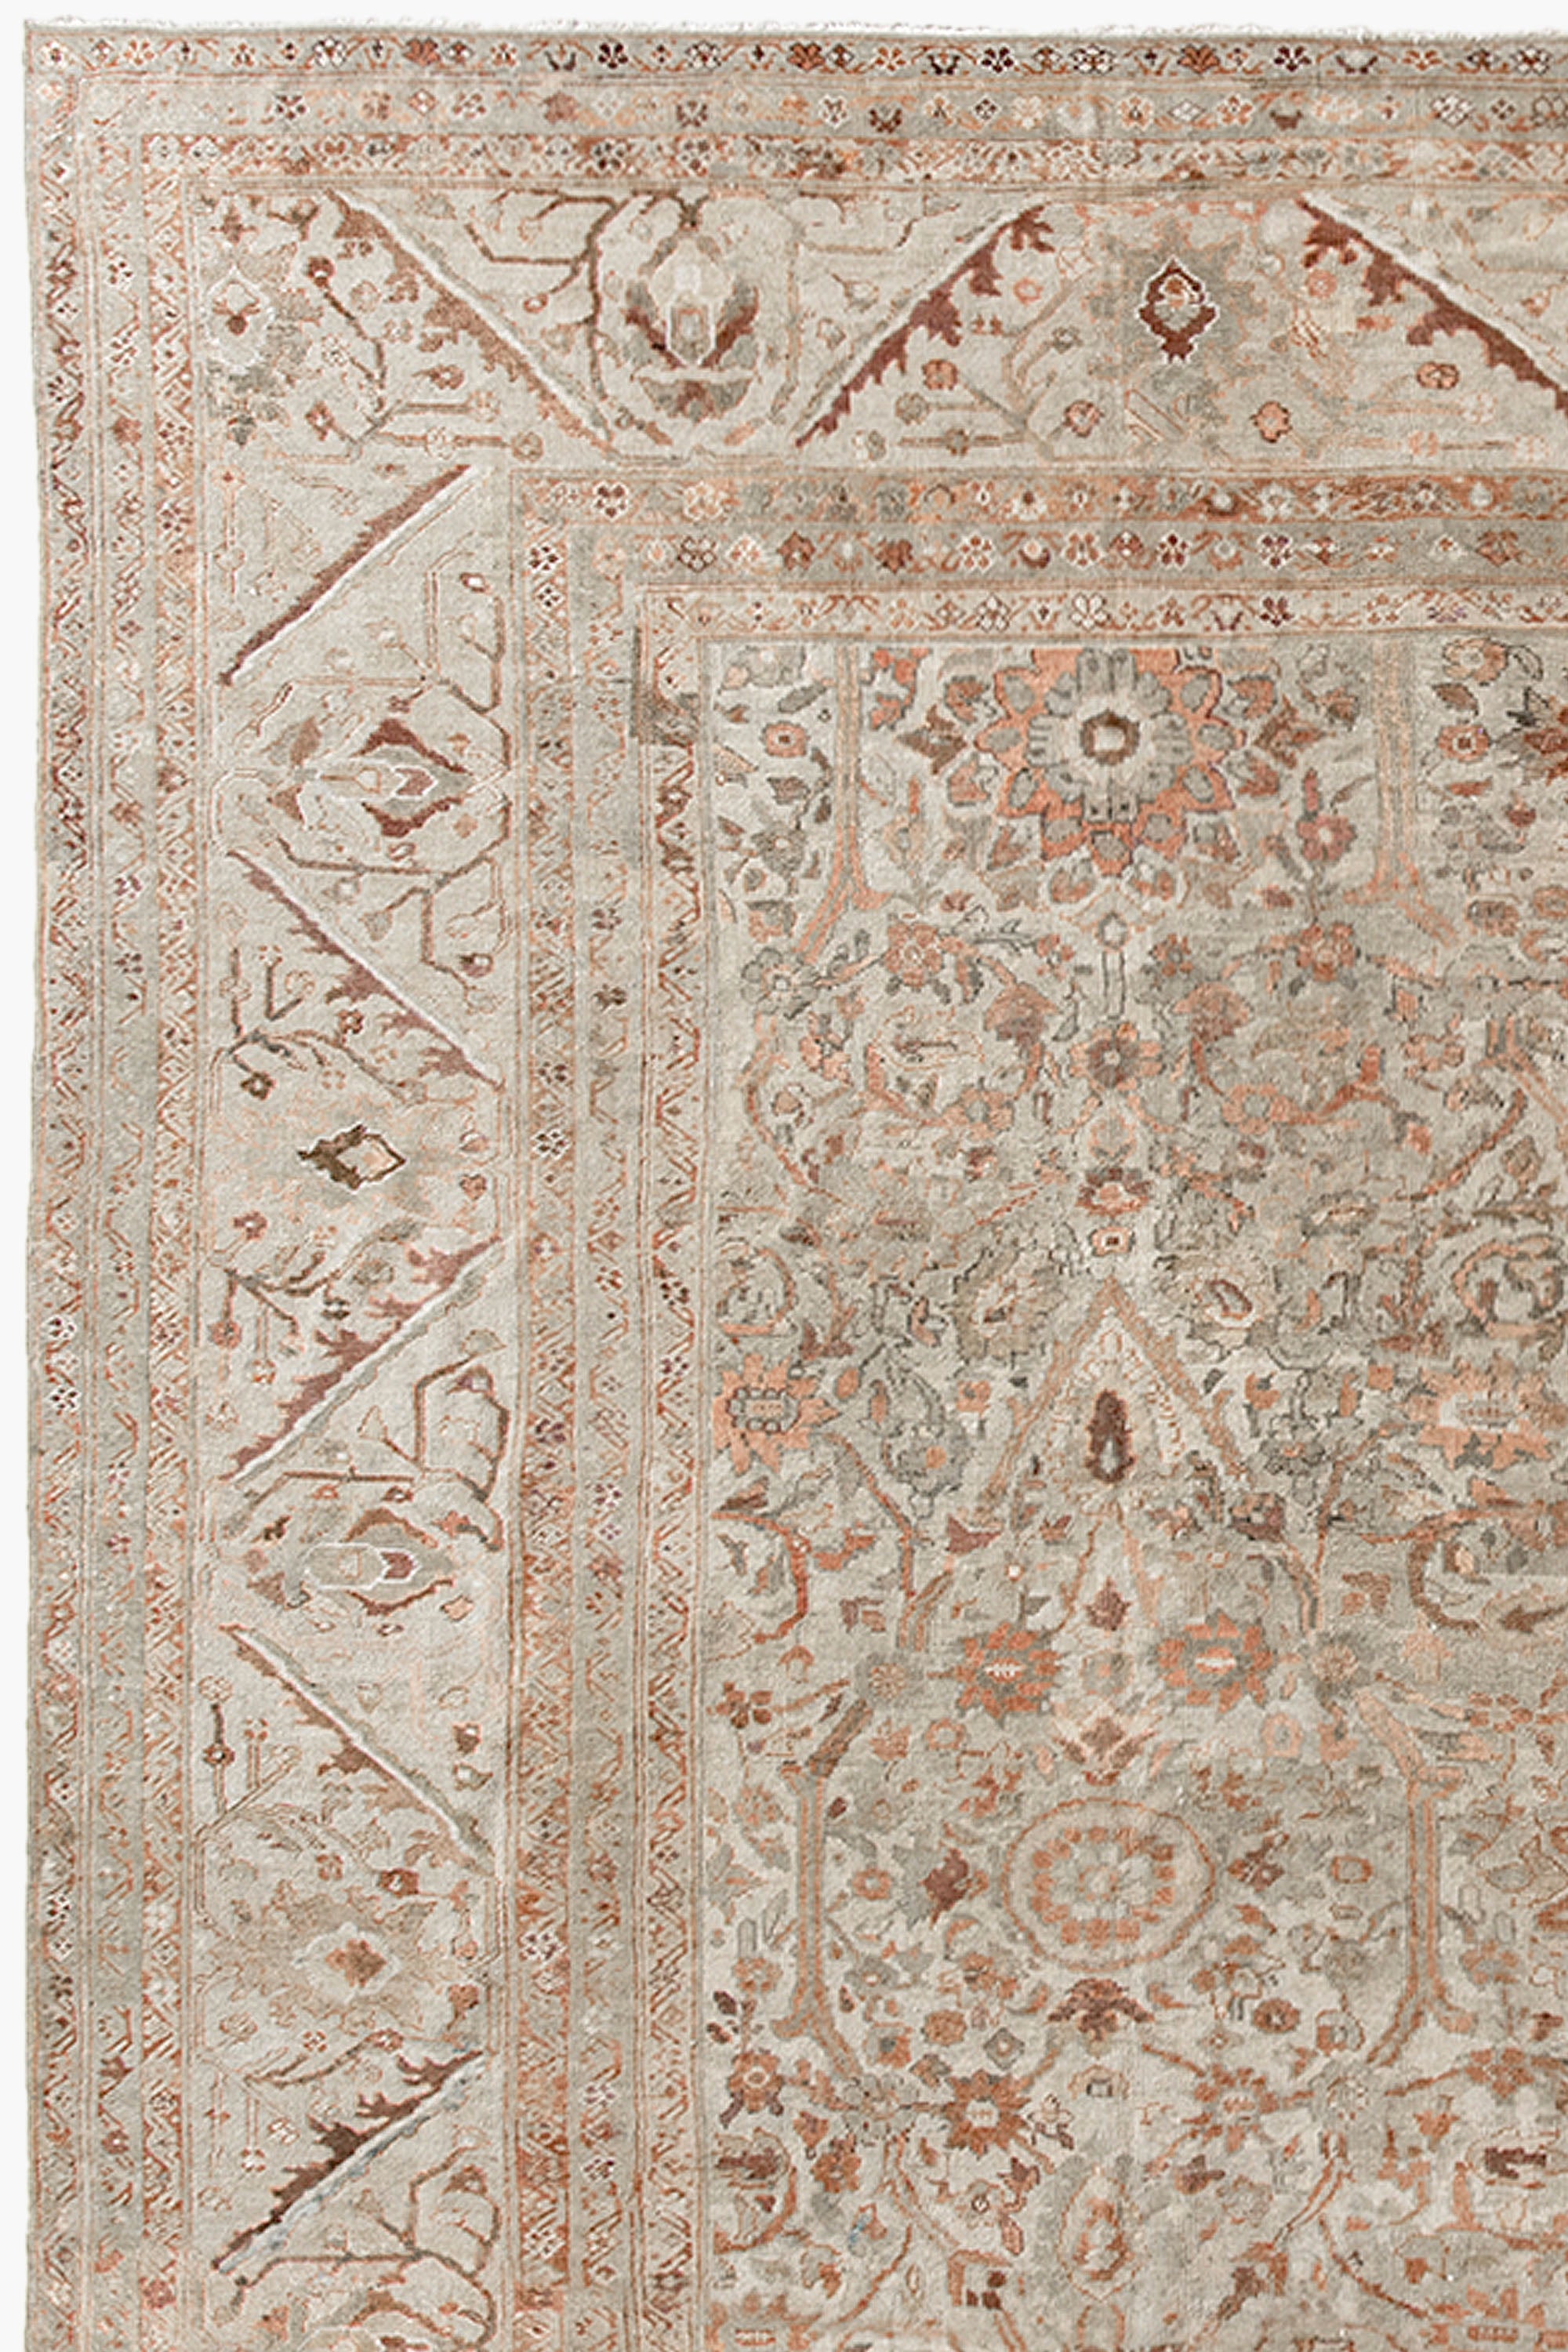 SULTANABAD RUG, AR31072/7322, WEST PERSIA, 13'7" X 19'8" - thumbnail 2